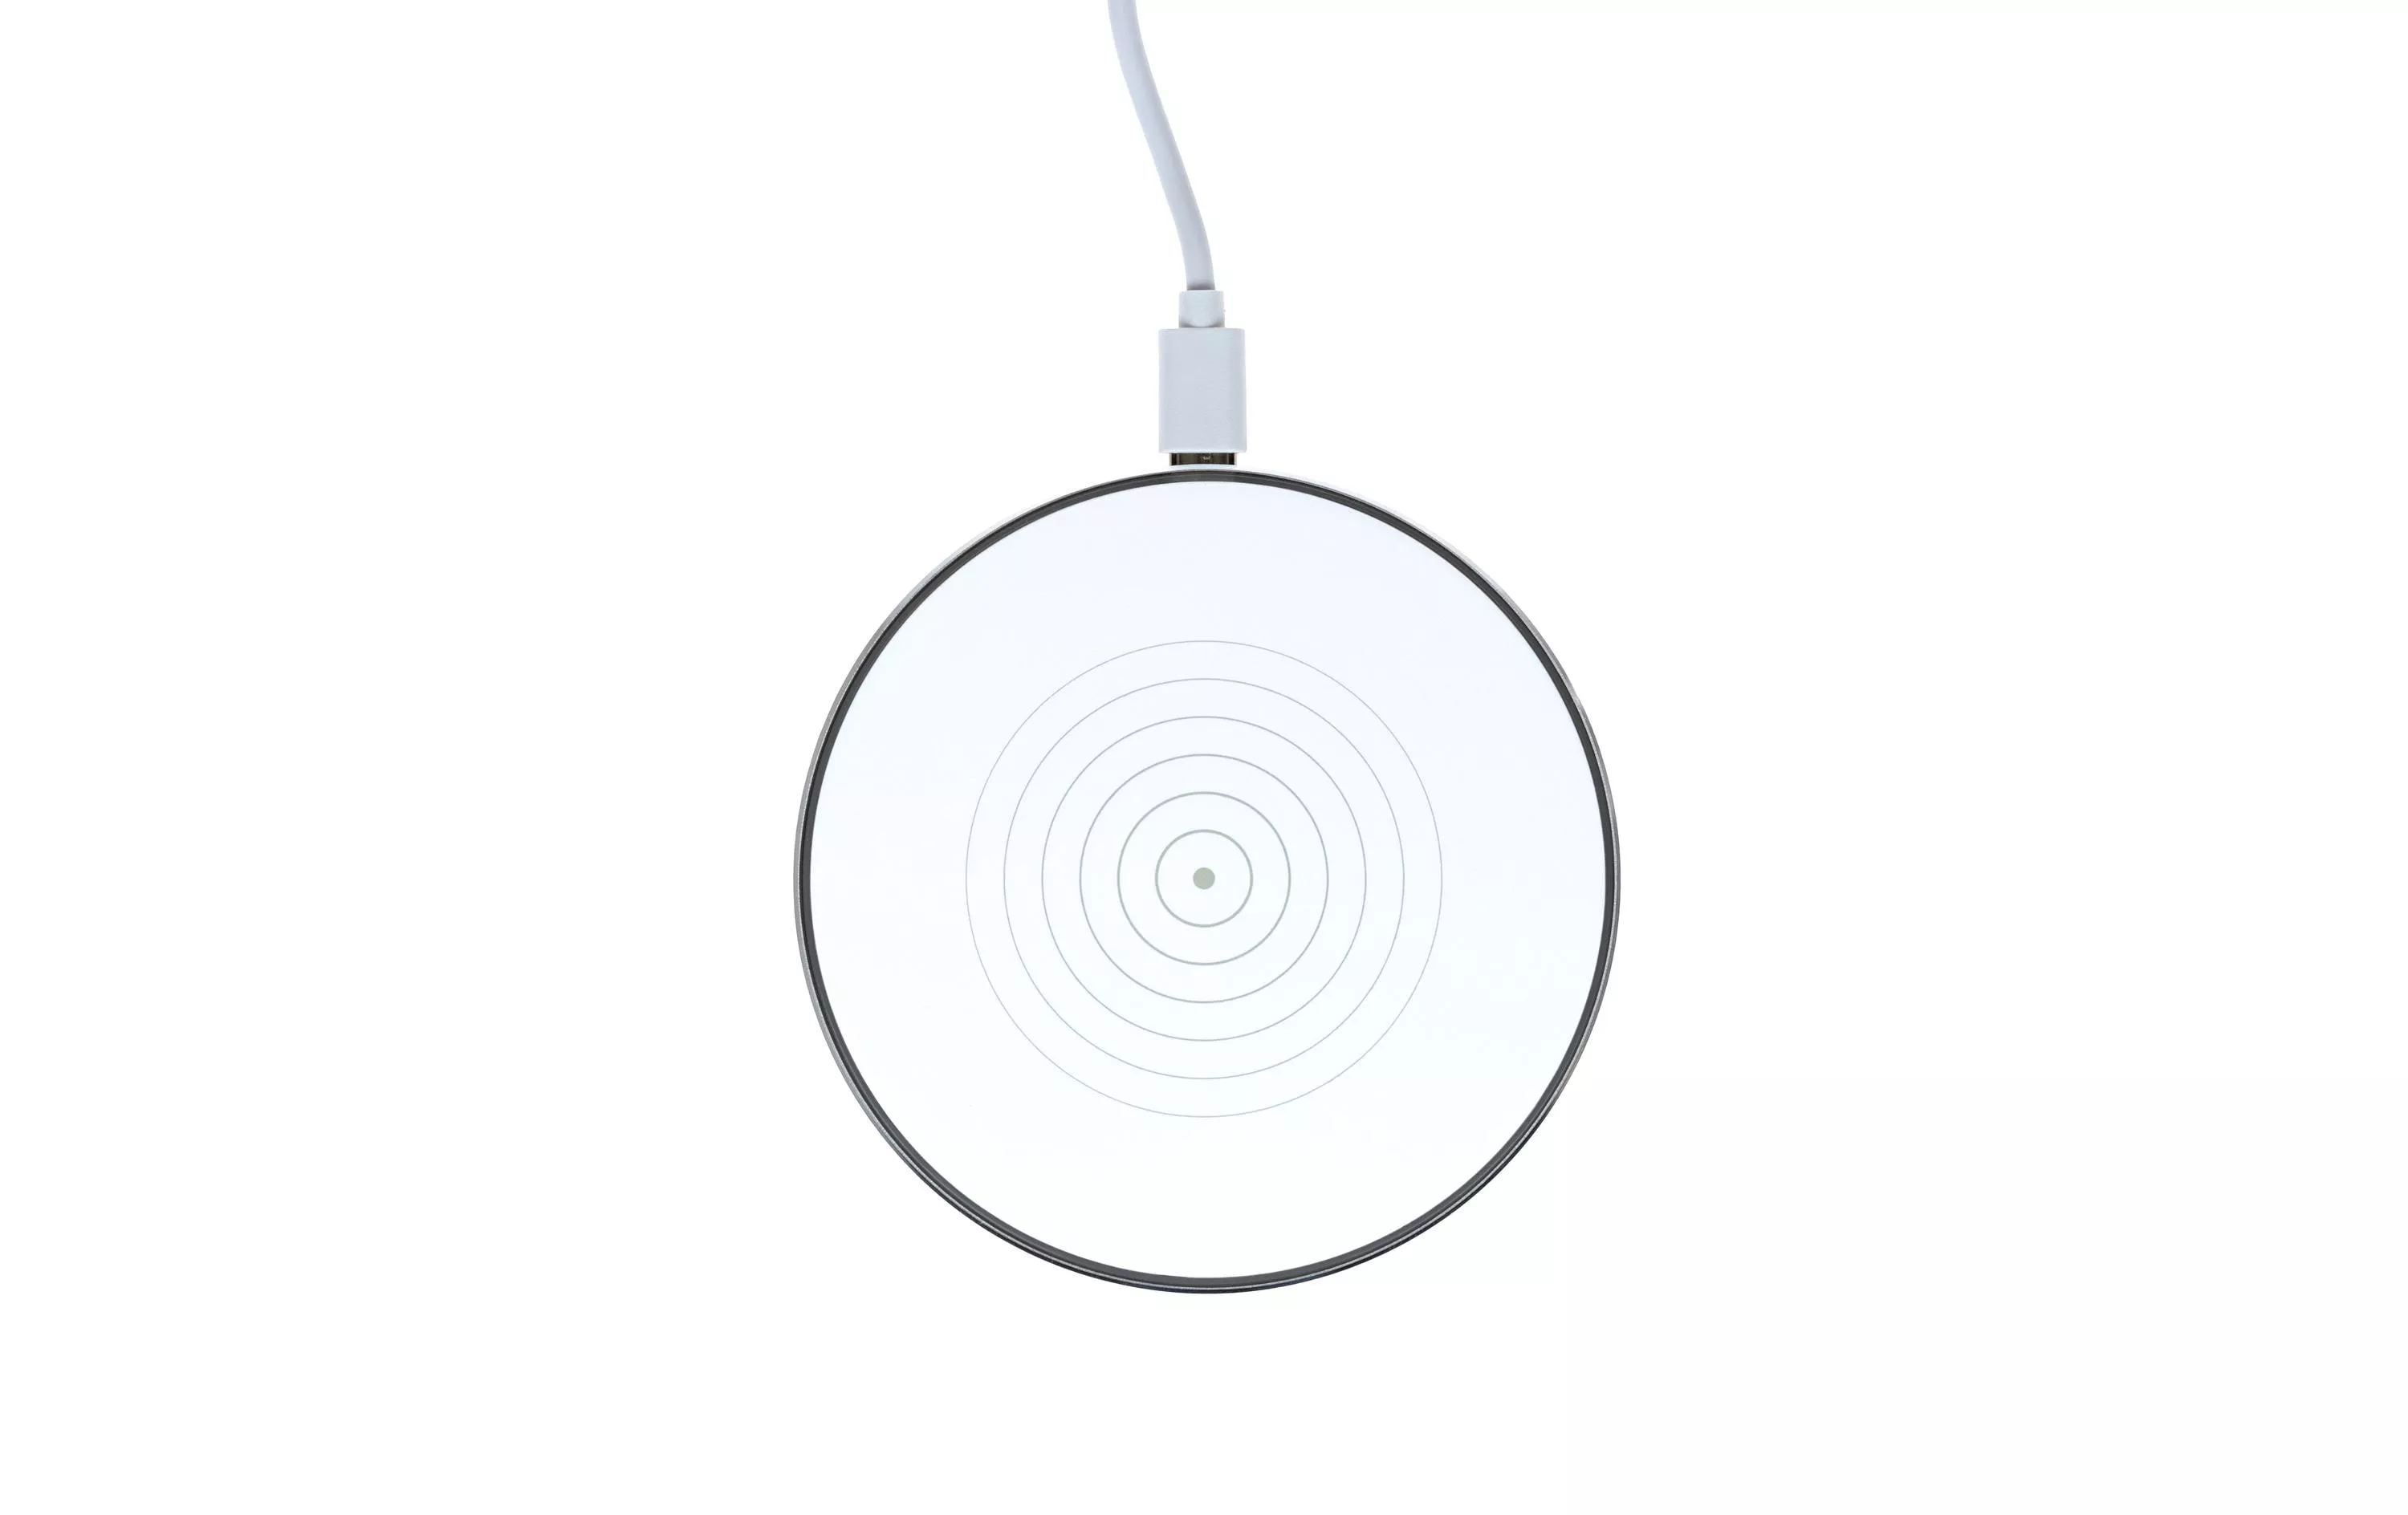 Wireless Charger 15 W Weiss